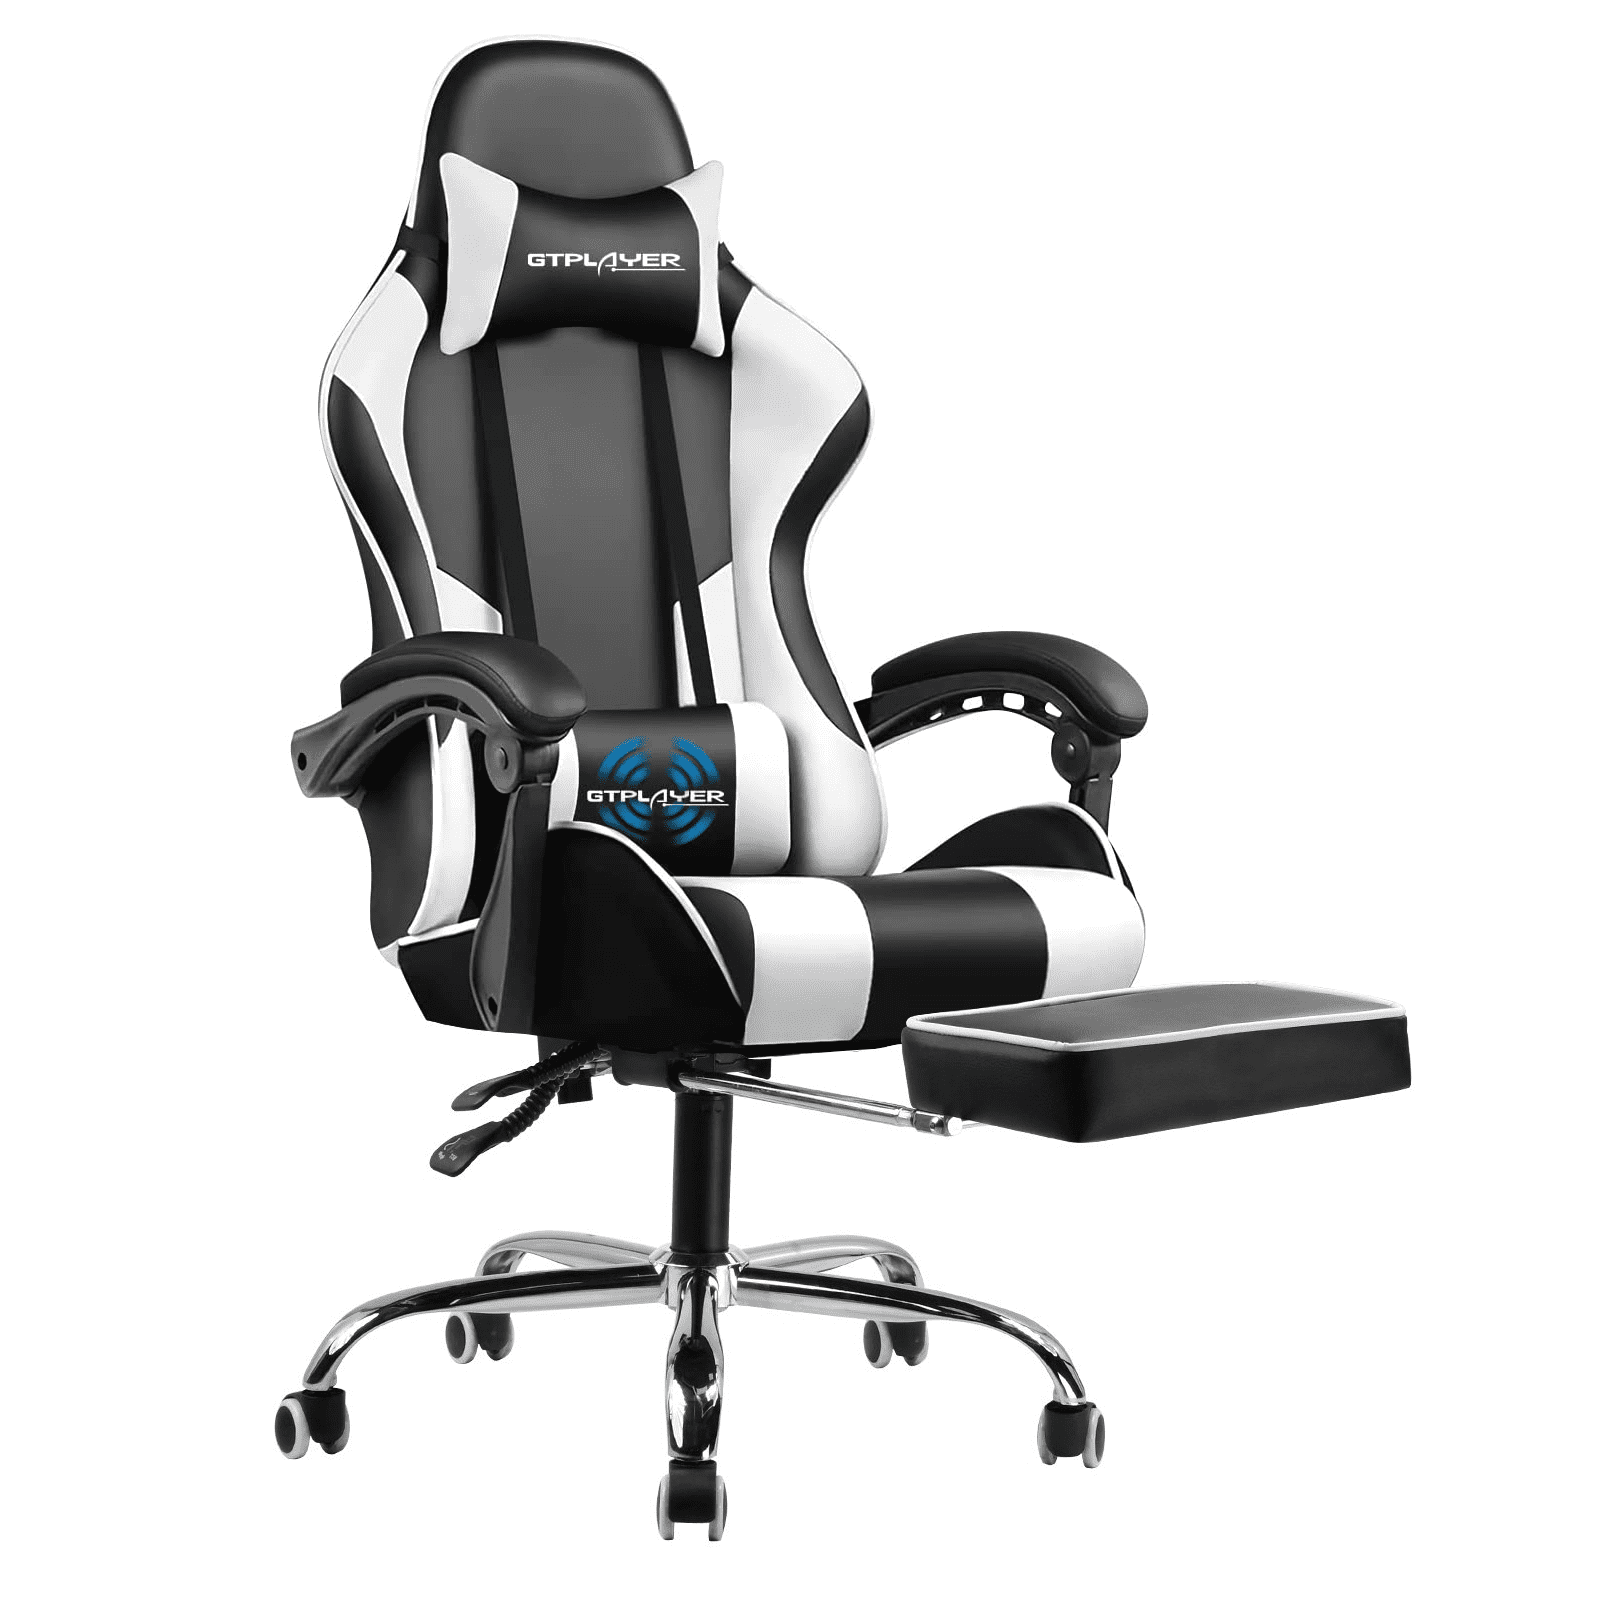 Smilemart Adjustable Ergonomic Office Chair Swivel Executive Leather Computer CH for sale online 